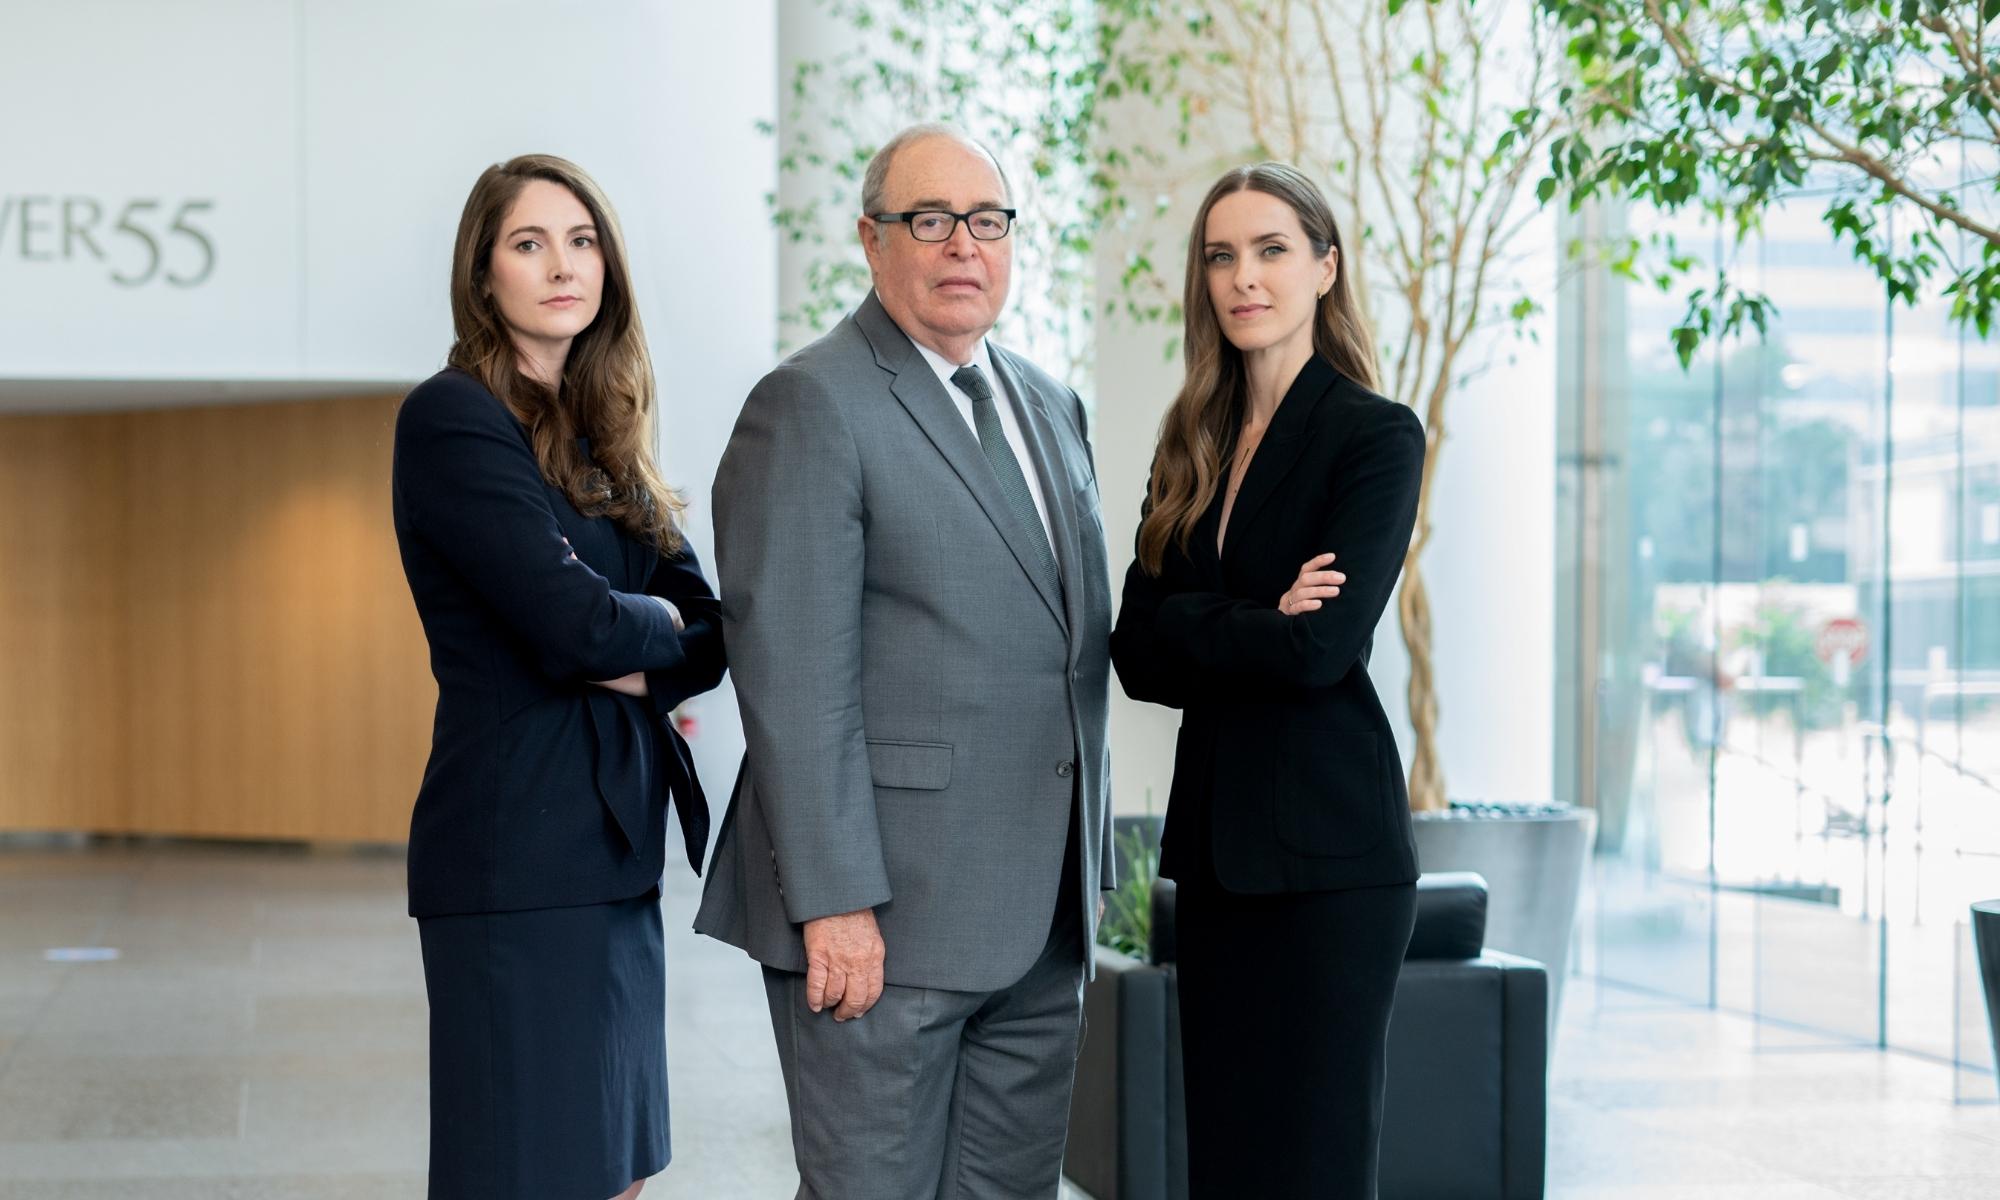 corporate branding photography for lawyers example